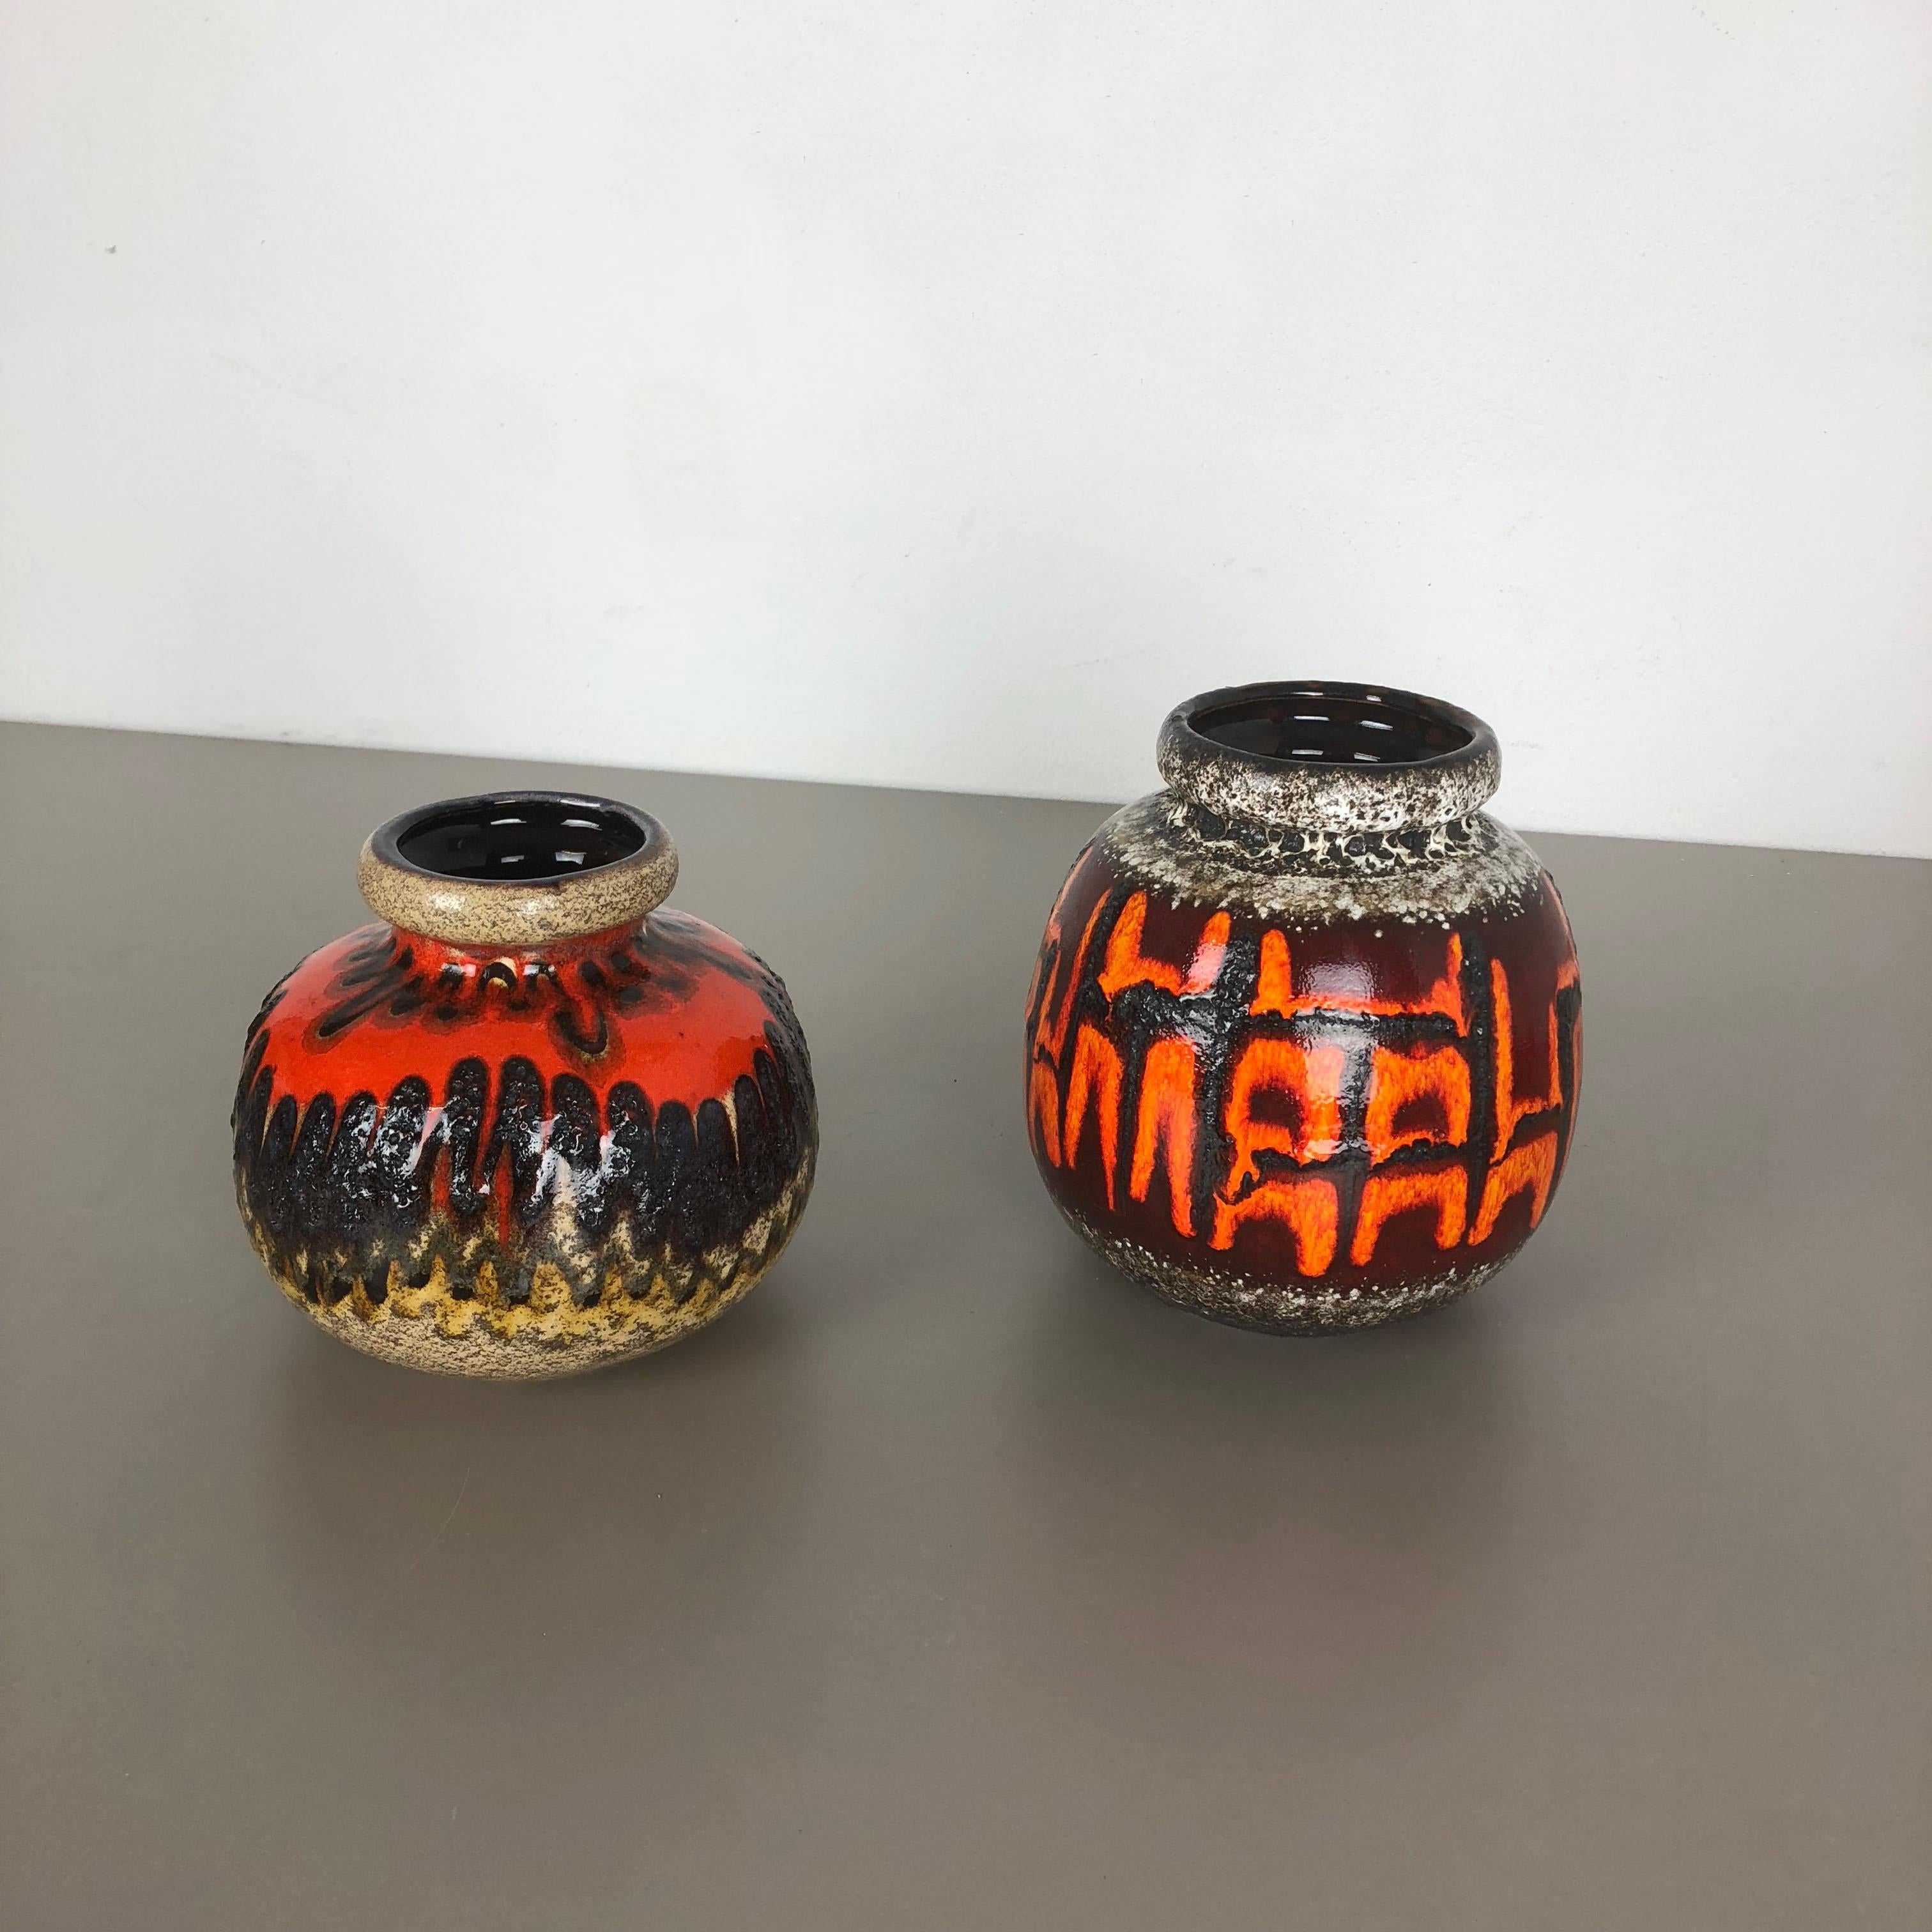 Article:

Set of two fat lava art vases

Model:
284-15
284-19



Producer:

Scheurich, Germany



Decade:

1970s




These original vintage vases was produced in the 1970s in Germany. It is made of ceramic pottery in fat lava